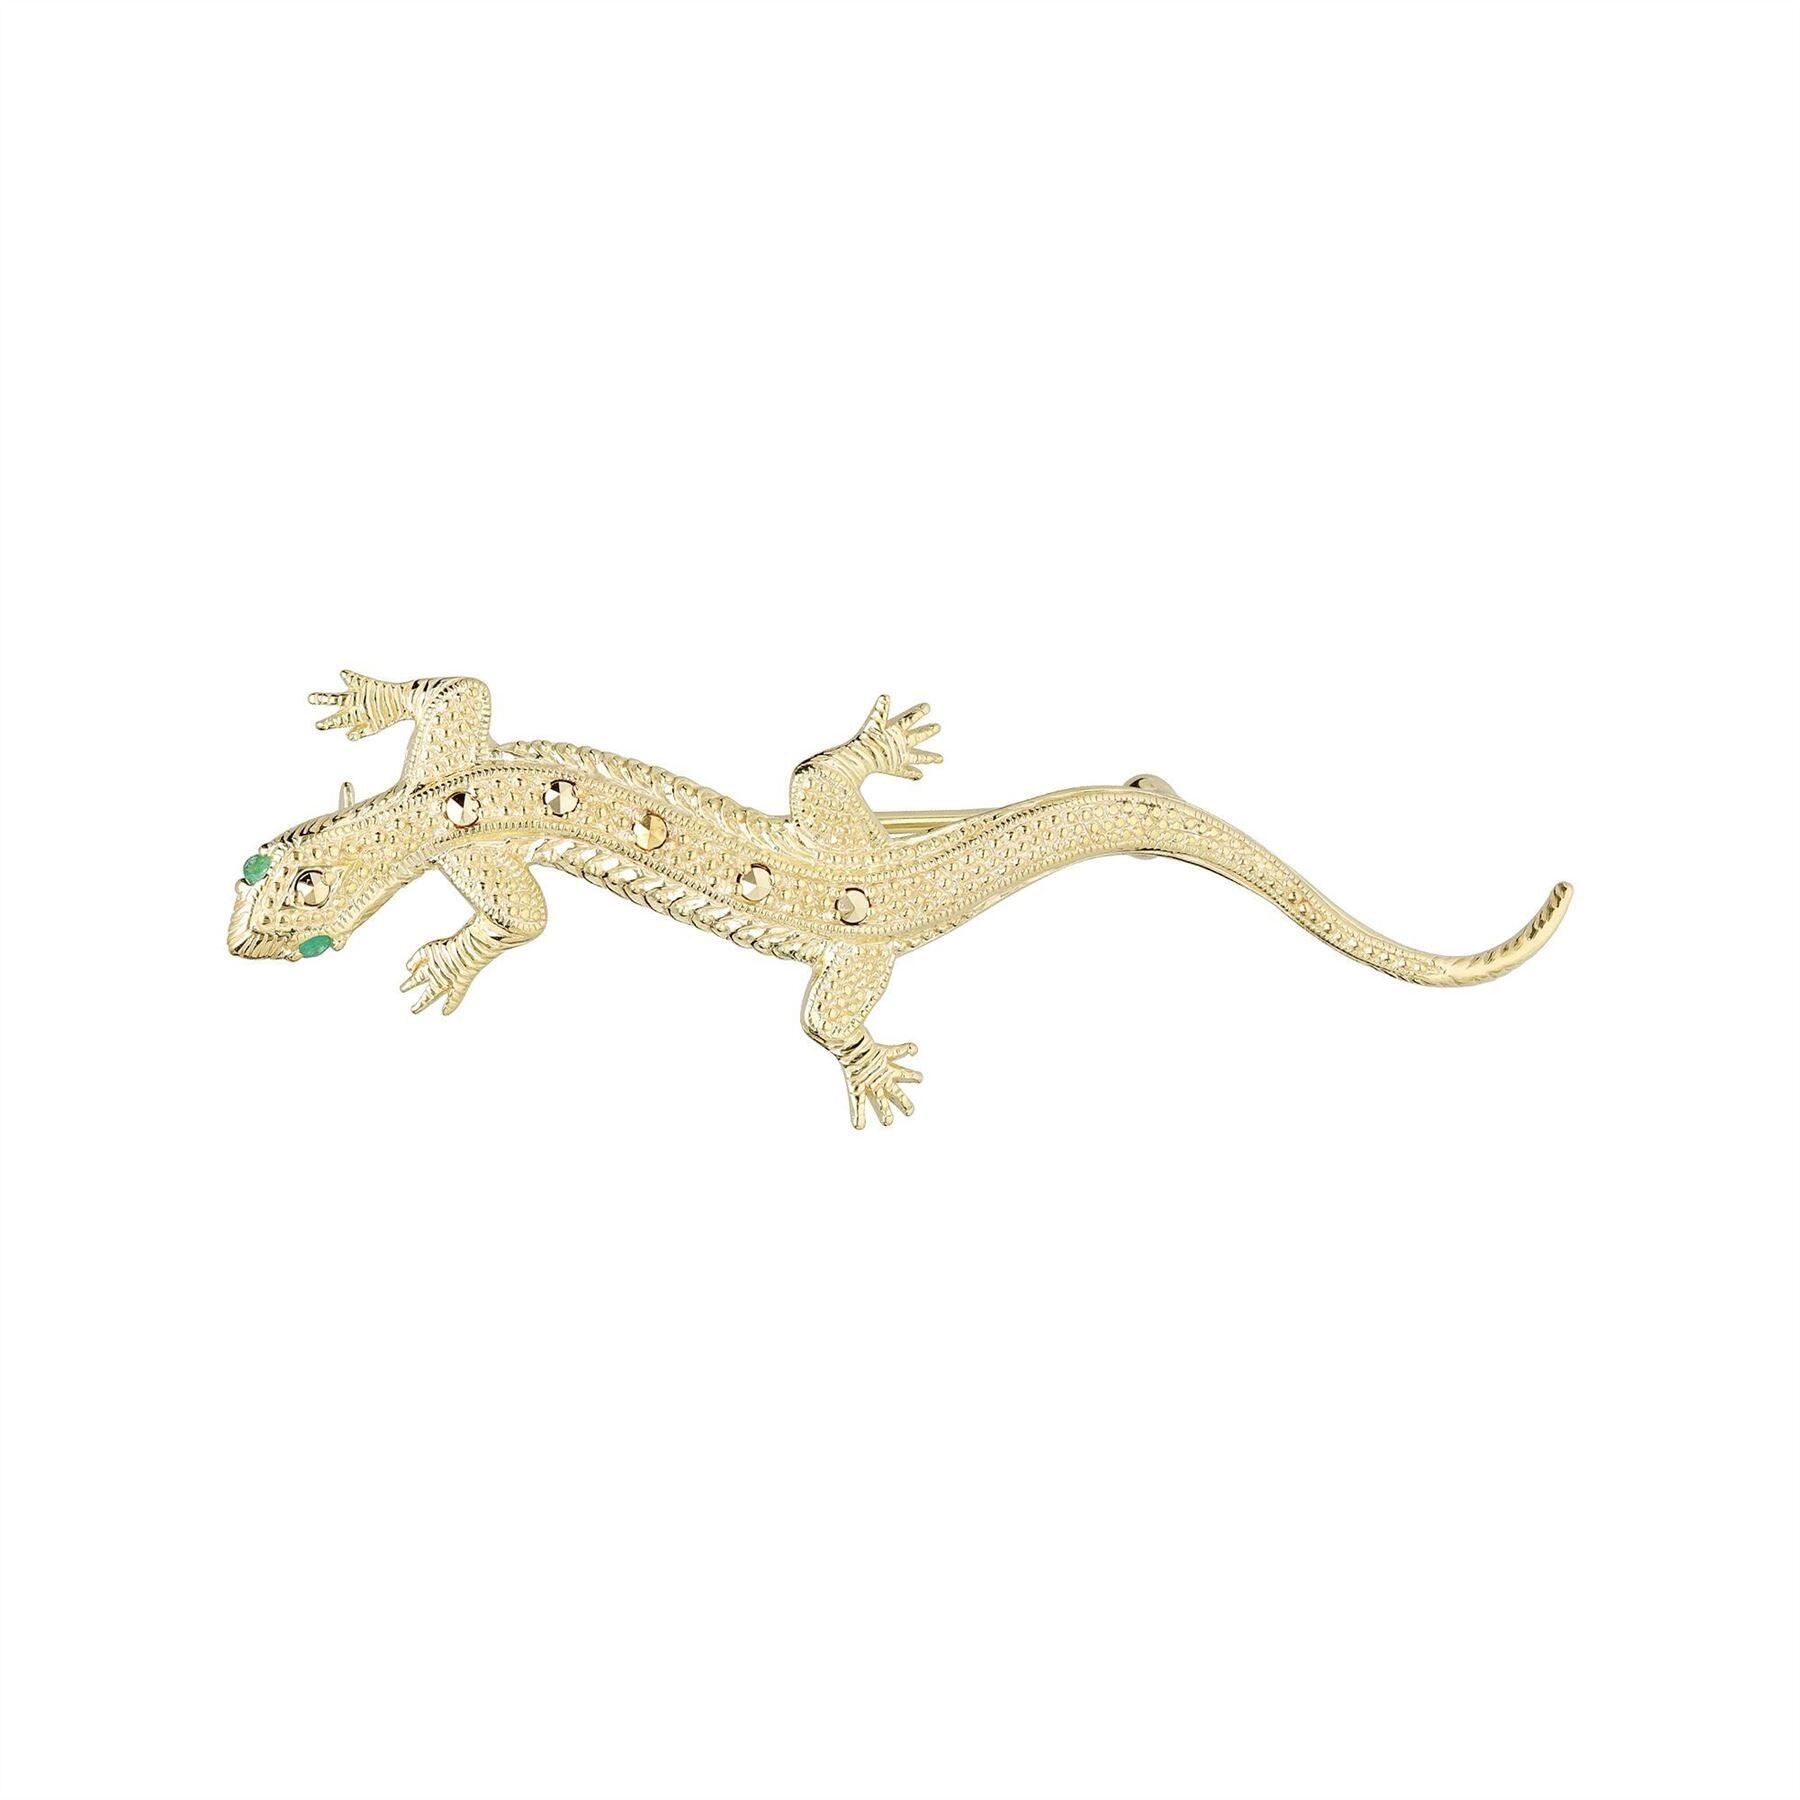 Emerald & Marcasite Gecko Brooch in 18ct Gold Plated Silver